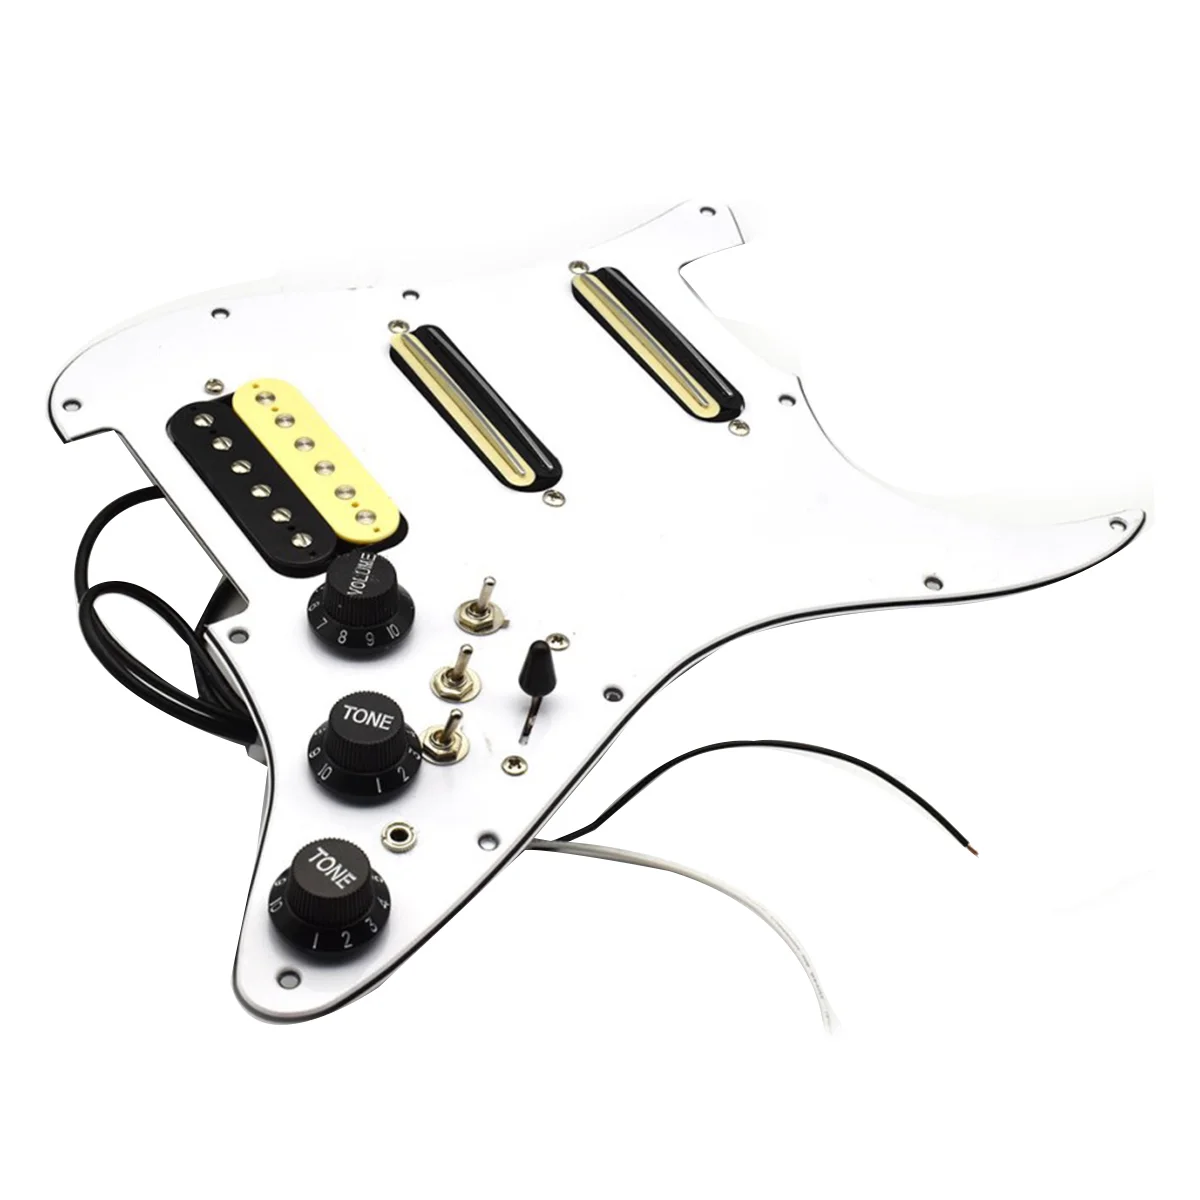 

ST Electric Guitar Pickguard Pickup Wiring Loaded Prewired Pickguard Guitar Pickguard Scratchplate Pickup Assembly